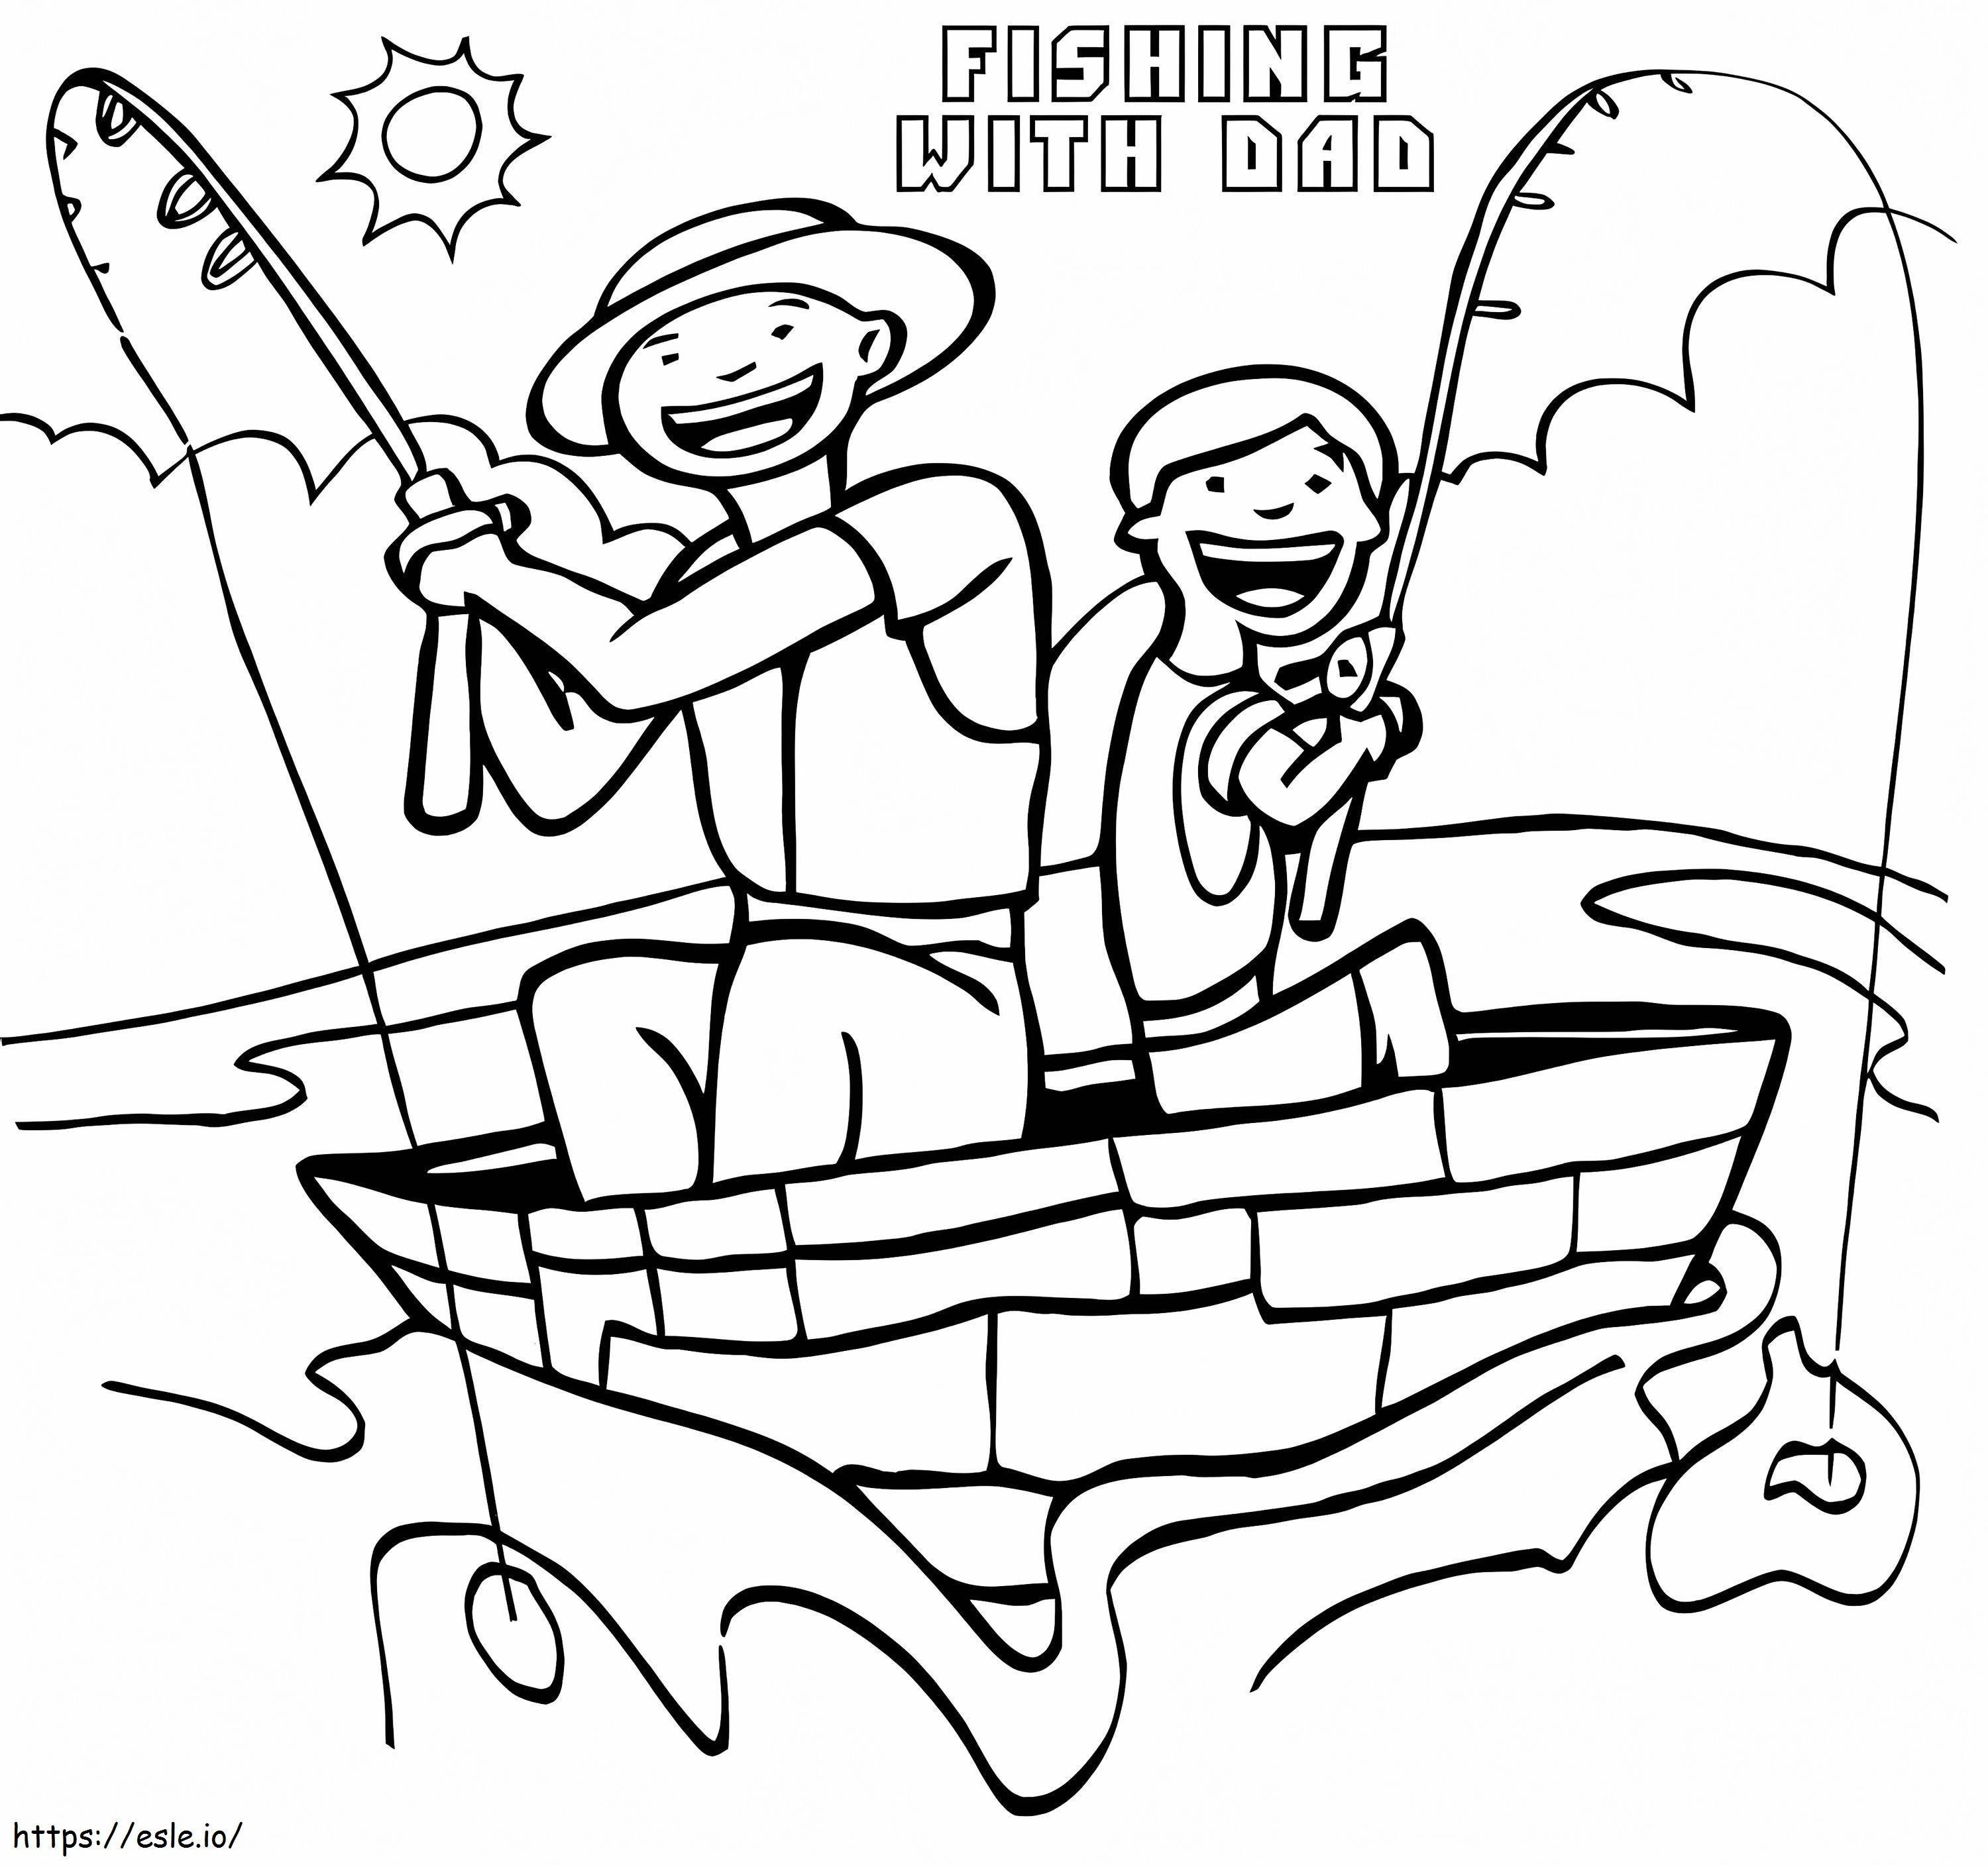 Fishing With Dad coloring page